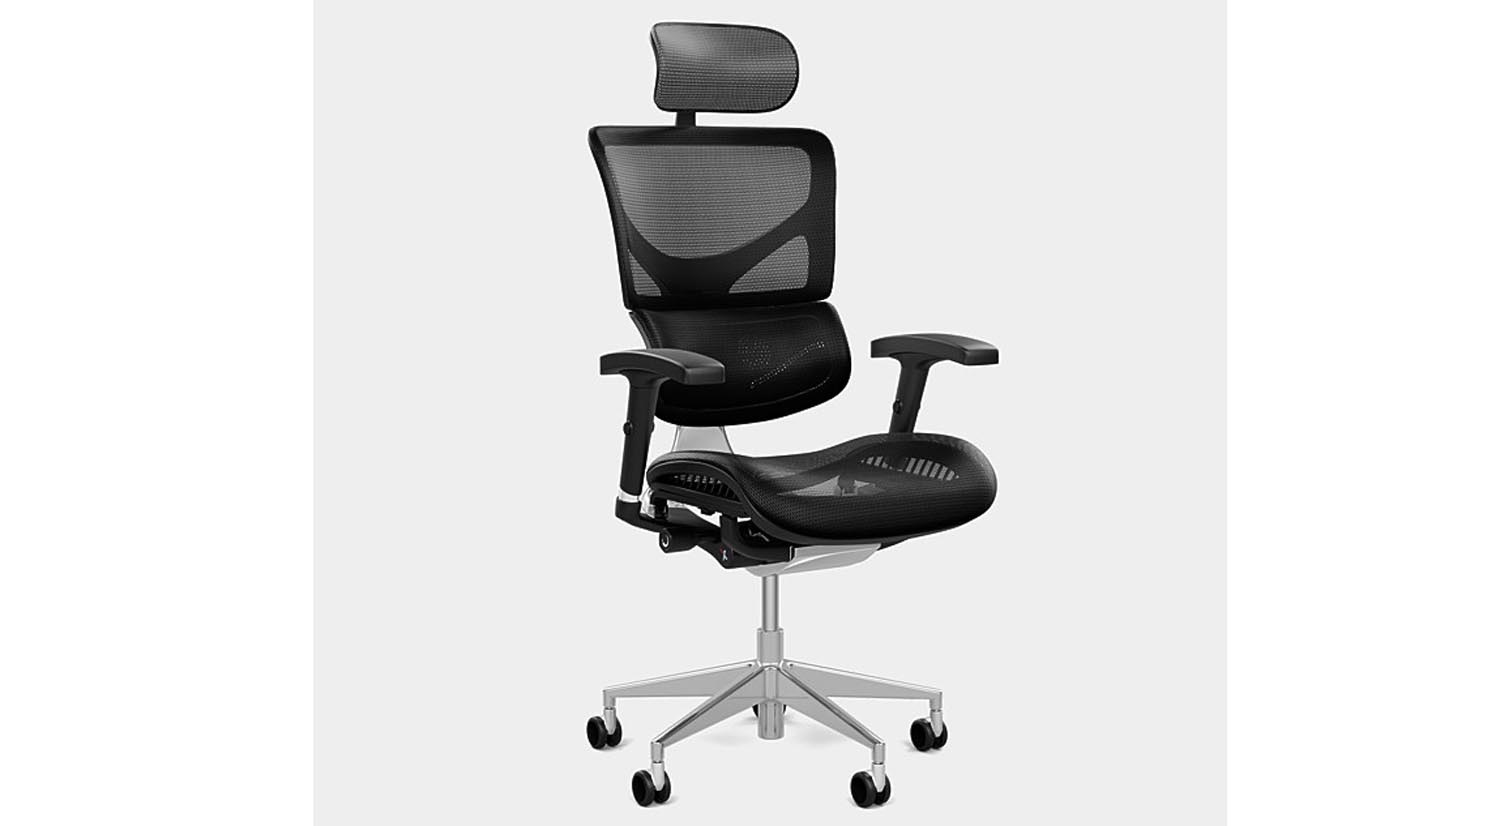 https://www.circlefurniture.com/userfiles/images/Products/X-Chair/X2-KSport-Mgmt-Chair/X2-main.jpg